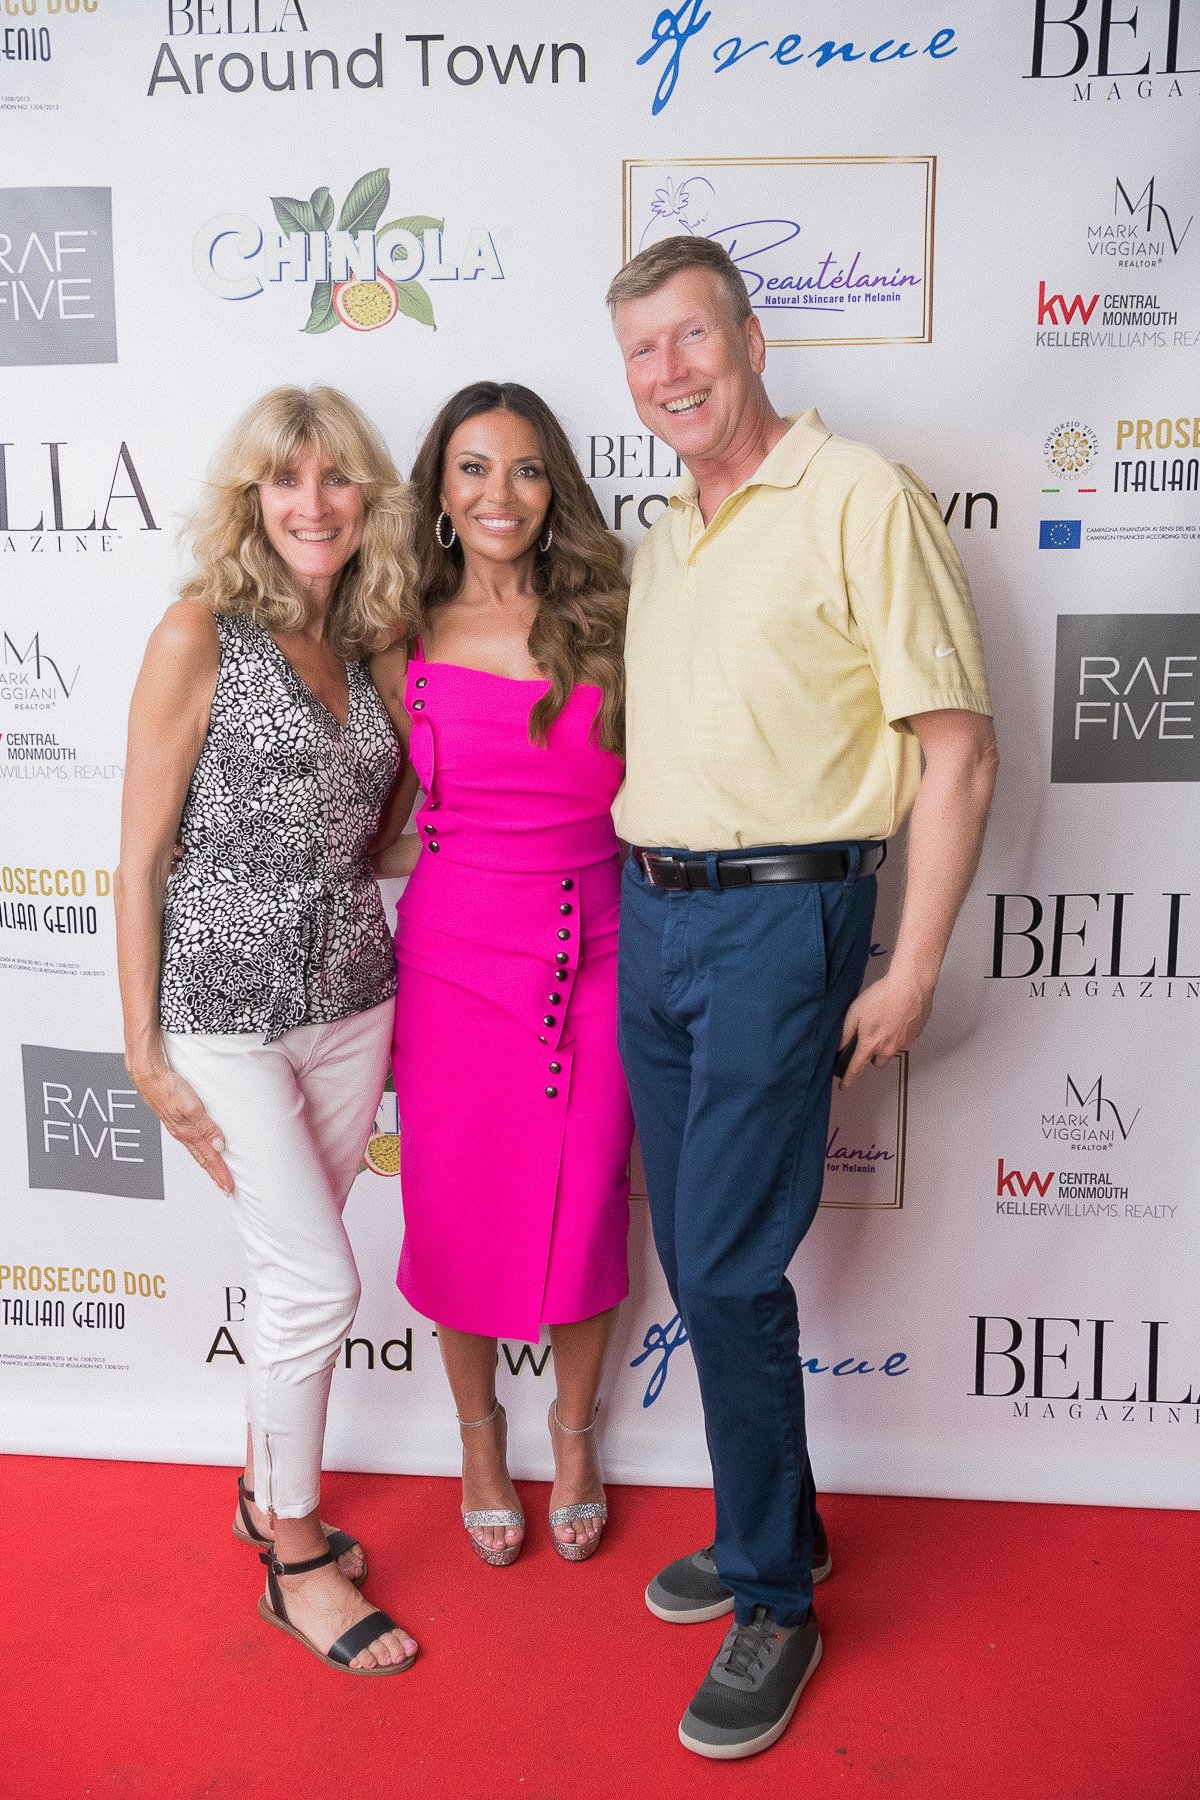 BELLA-MAGAZINE-Summer-Issue-Cover-Party-Avenue-Long-Branch-219.jpg